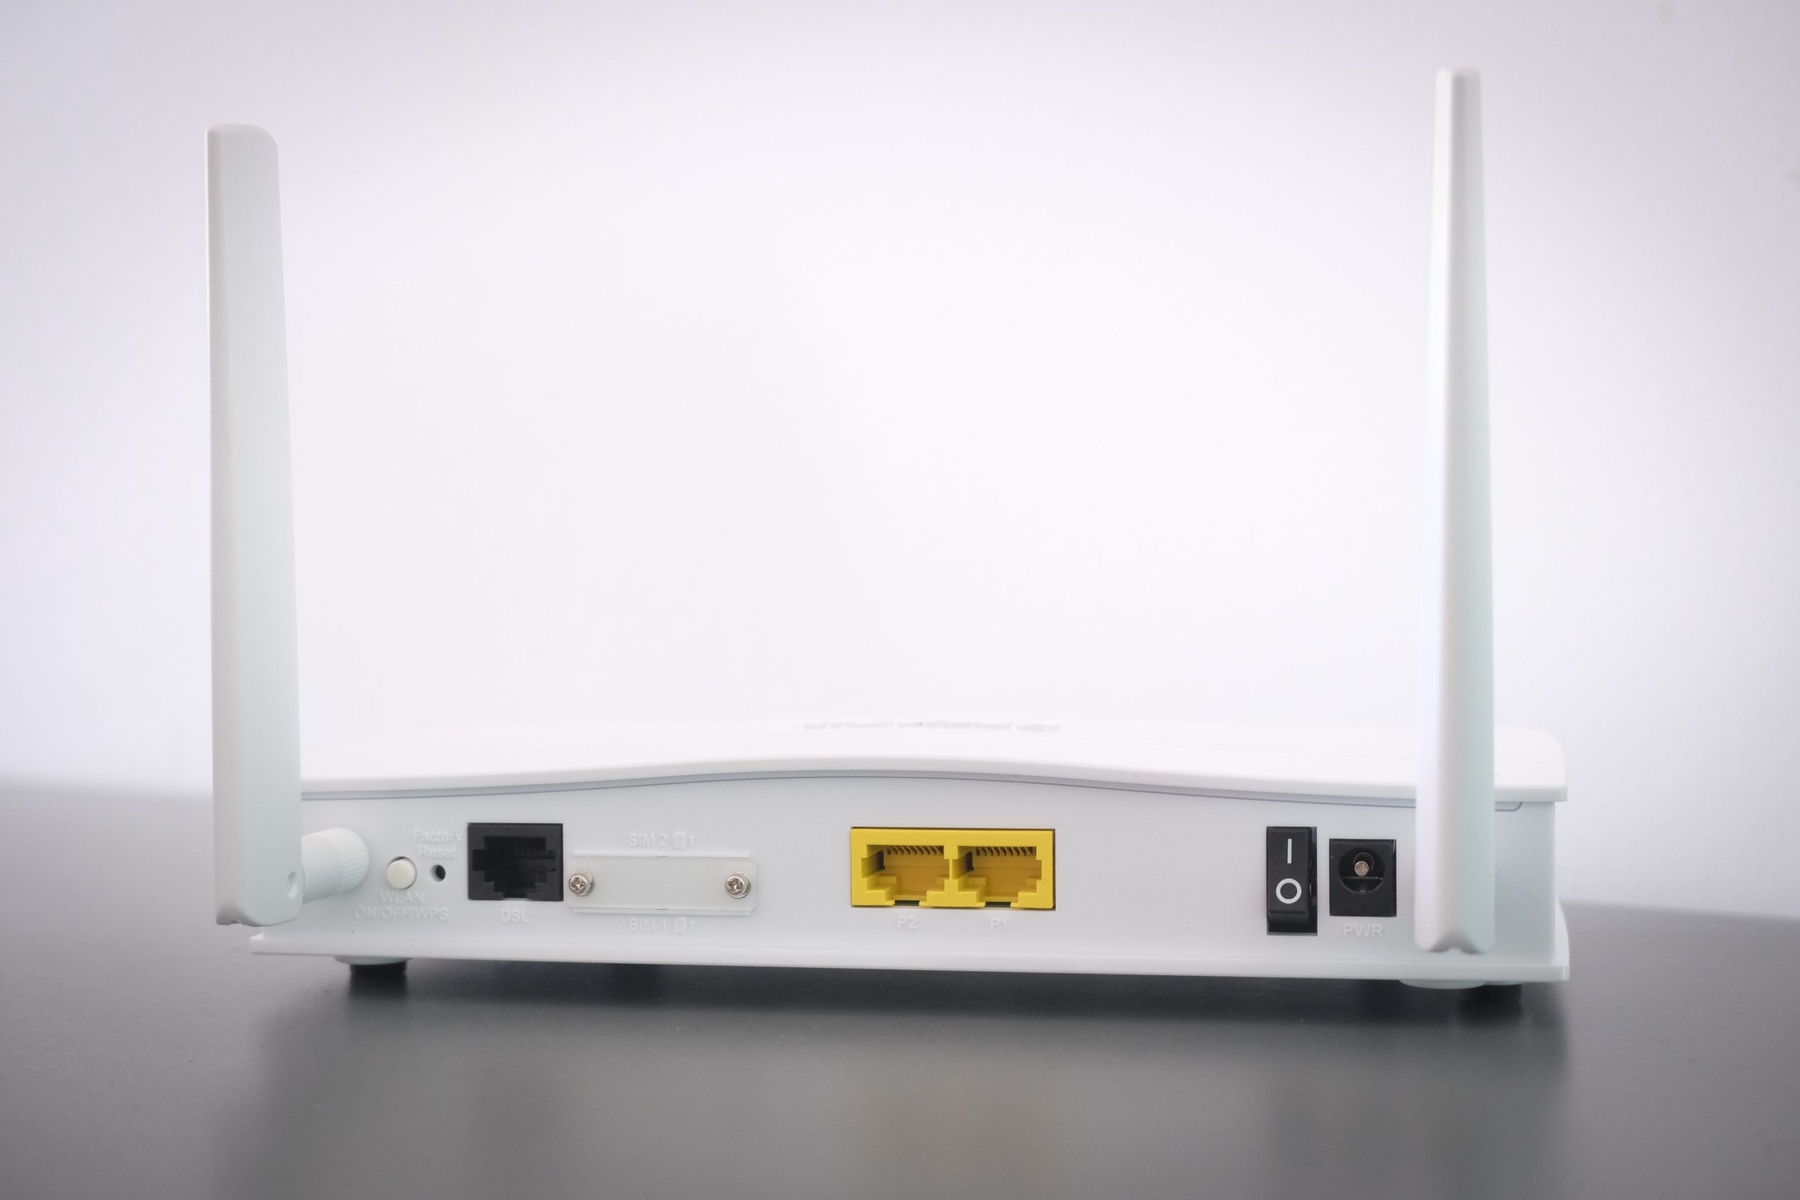 What Is The Lifespan Of A Wireless Router